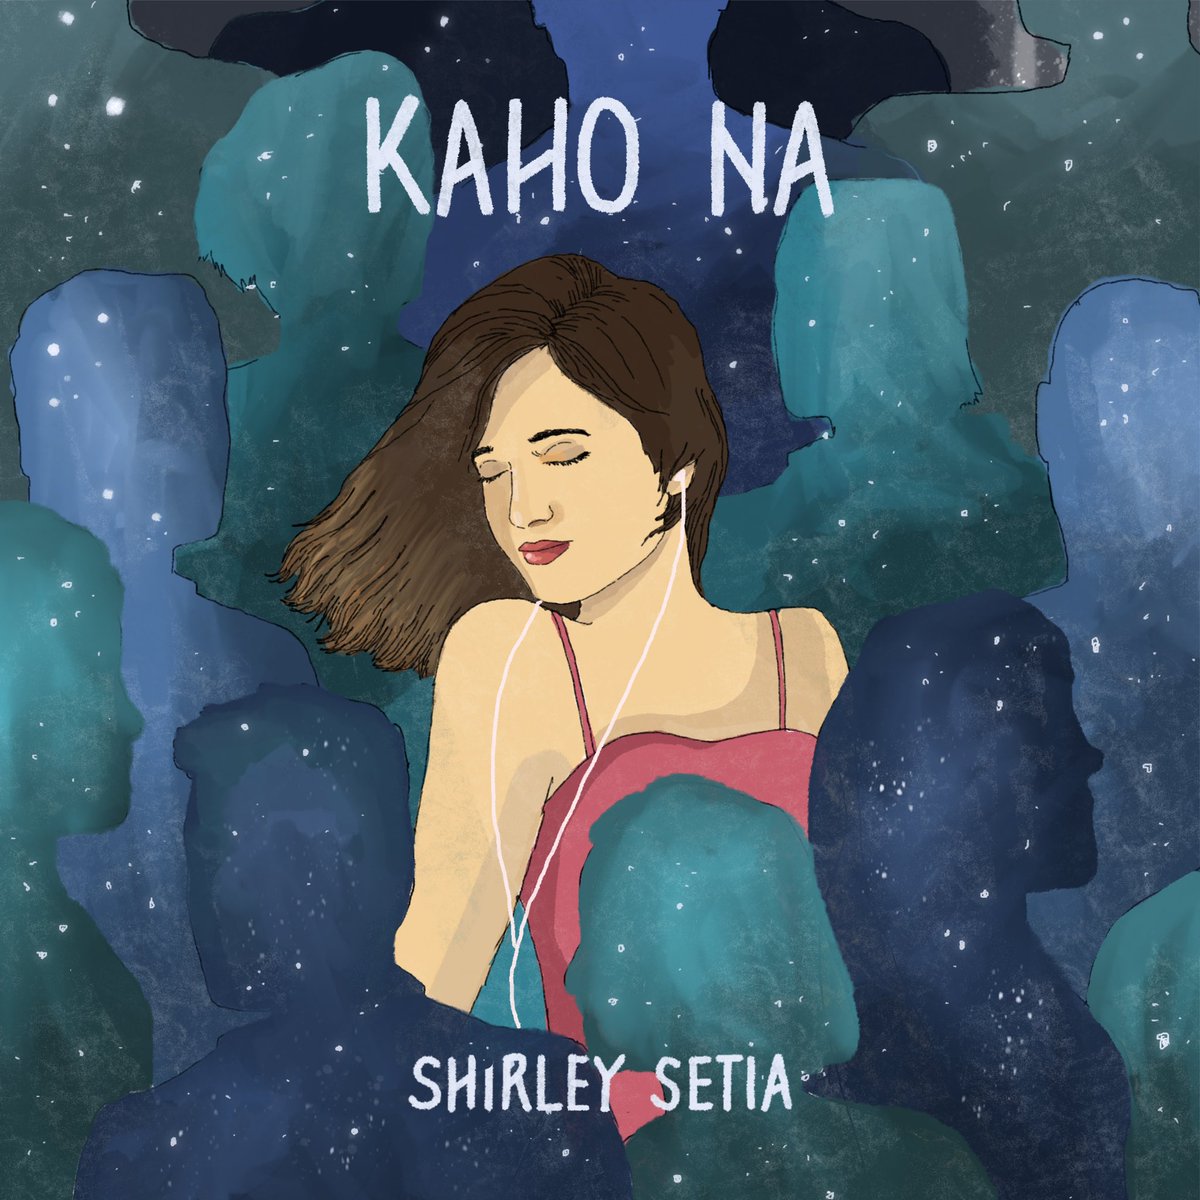 #KahoNa My next single out on 28.03.23 🤍 This one’s a cuteee one! 💘 #ShirleySetia #independentmusic